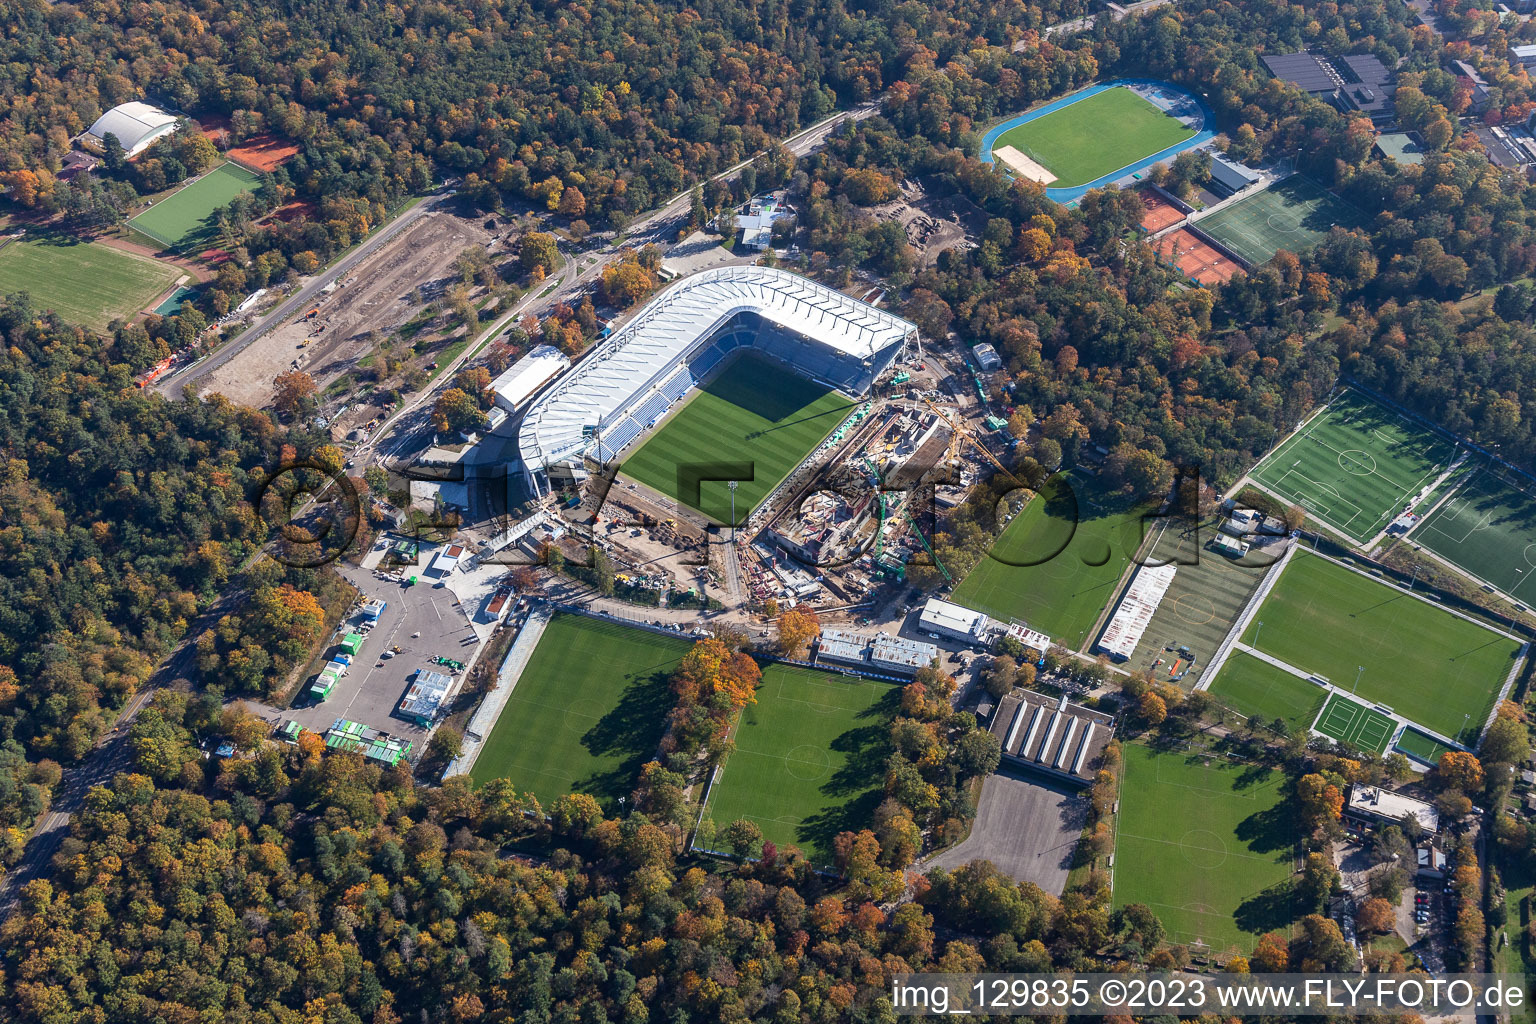 Extension and conversion site on the sports ground of the stadium " Wildparkstadion " in Karlsruhe in the state Baden-Wurttemberg, Germany seen from a drone